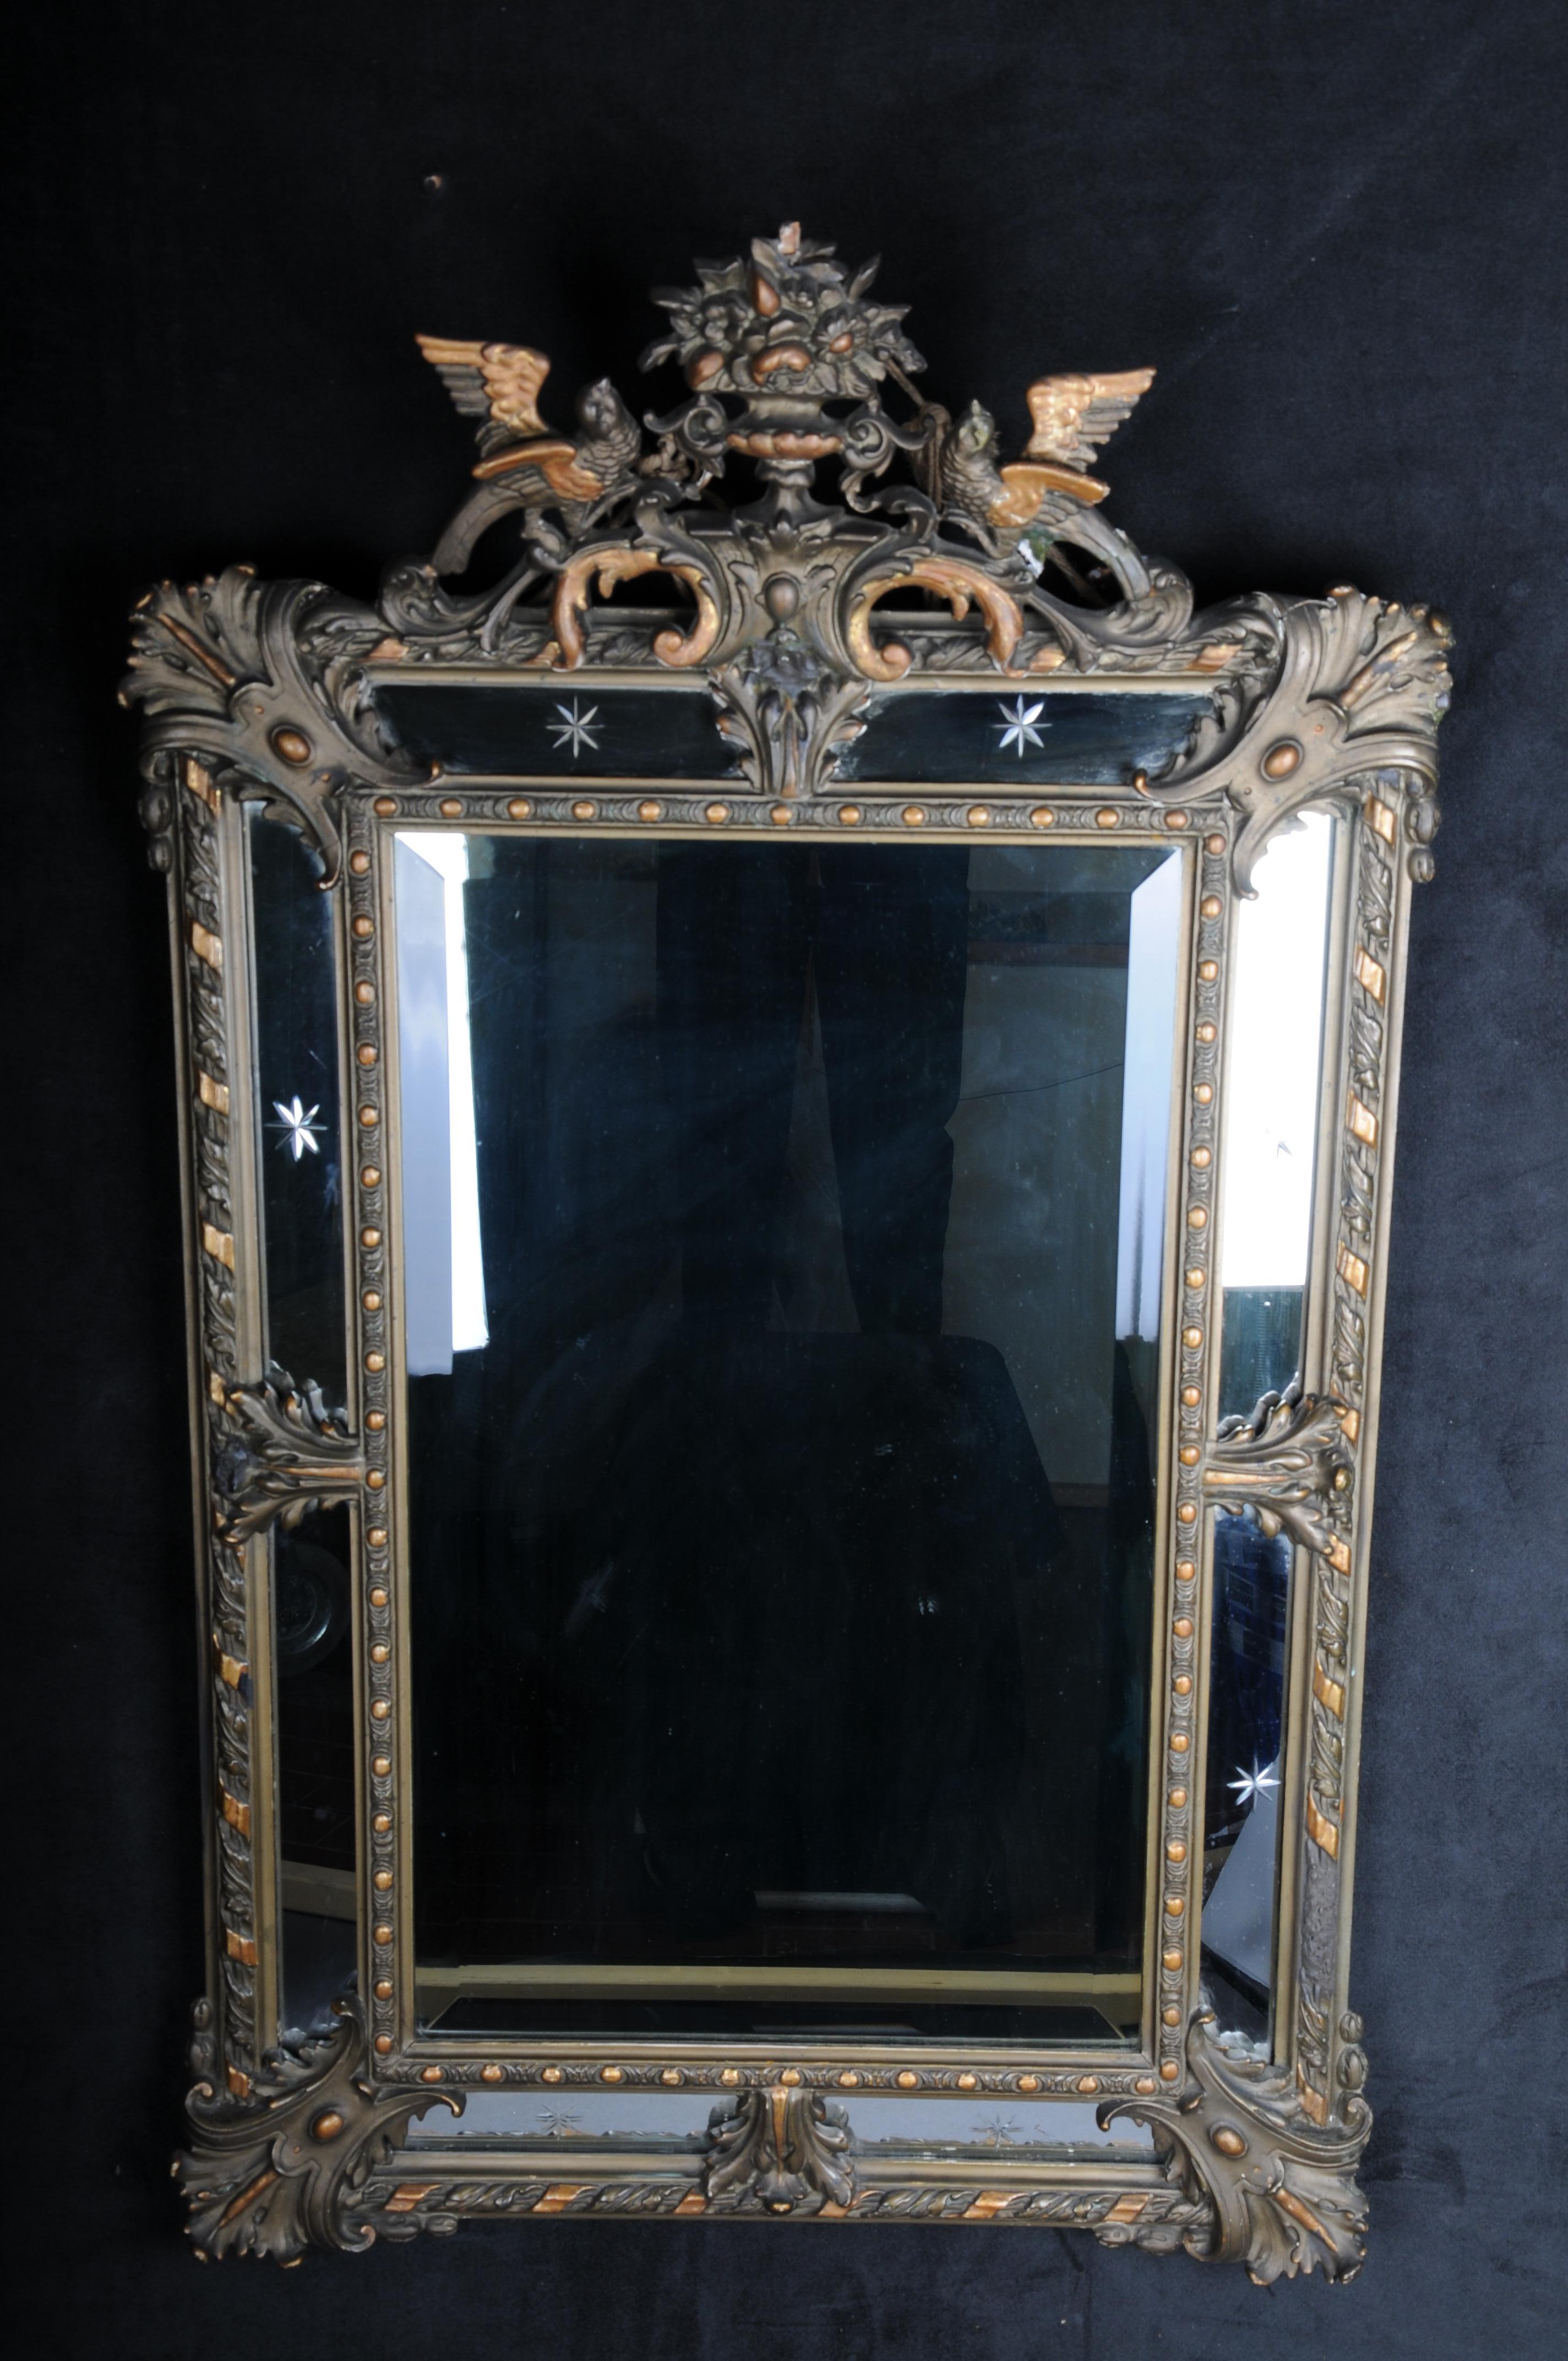 Antique historicism mirror, around 1870, gilded.

Richly decorated mirror in historicism around 1870. Framed mirror with rich decorative elements. Body completely set in gold. Please refer to the detailed pictures for the condition.